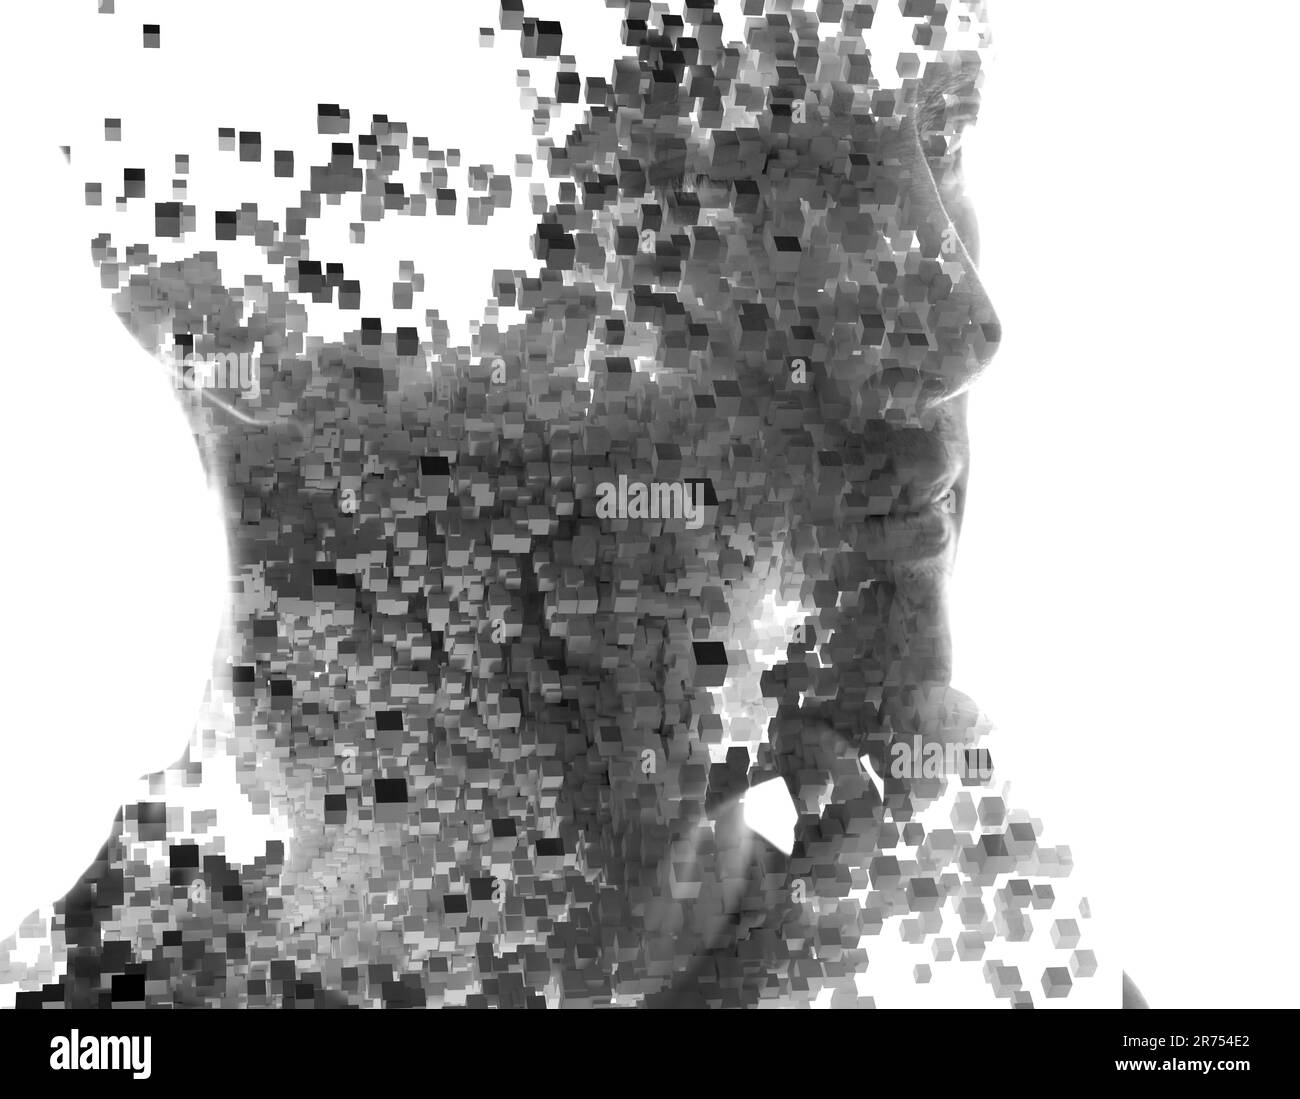 Double exposure portrait of a man combined with a pattern of small 3D cubes Stock Photo